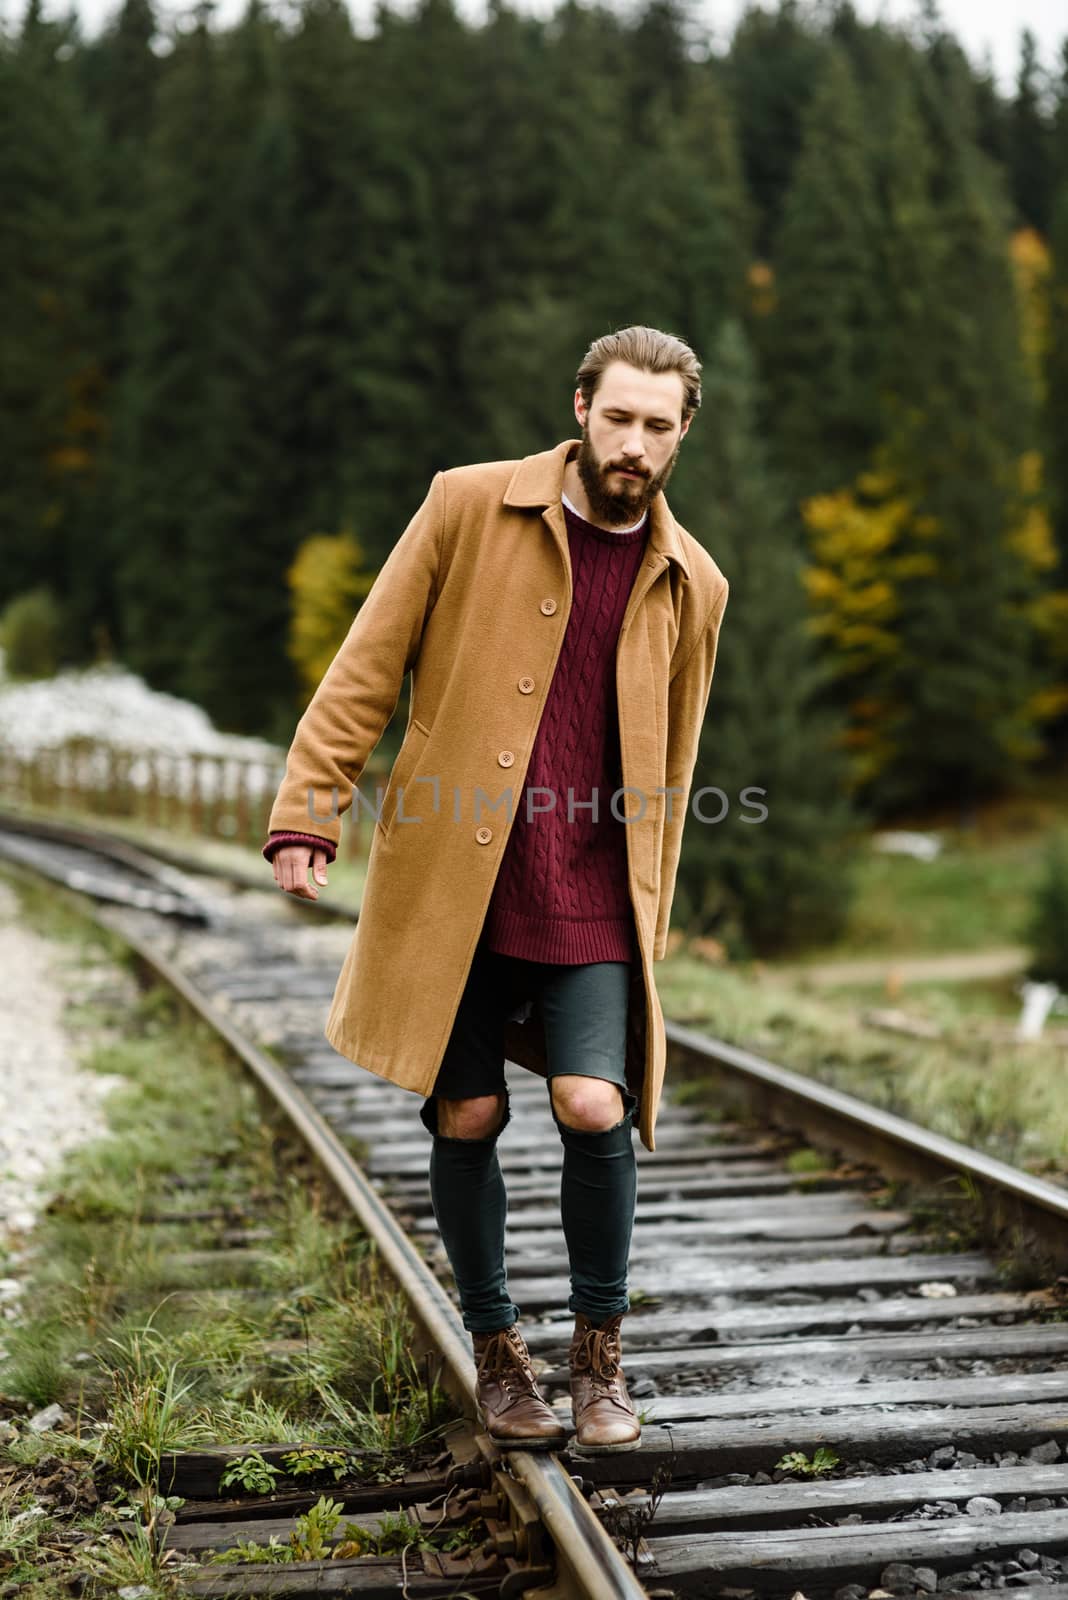 brutal bearded man walks on the tracks by Andreua